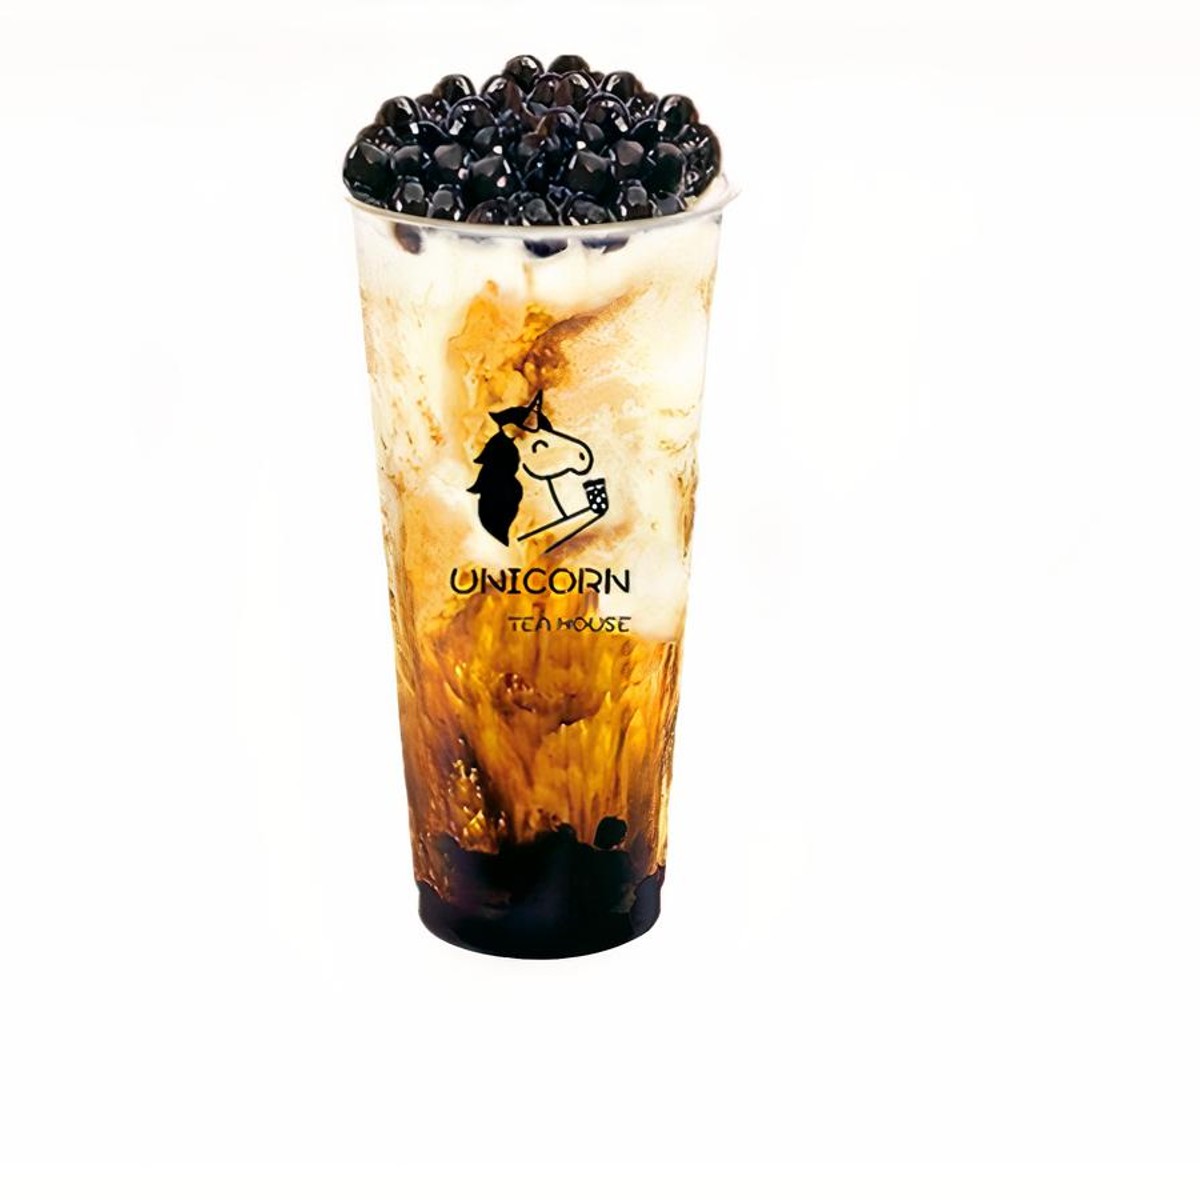 Q-Cup Boba Tea - Save me from the Boba! - Jacksonville Restaurant Reviews